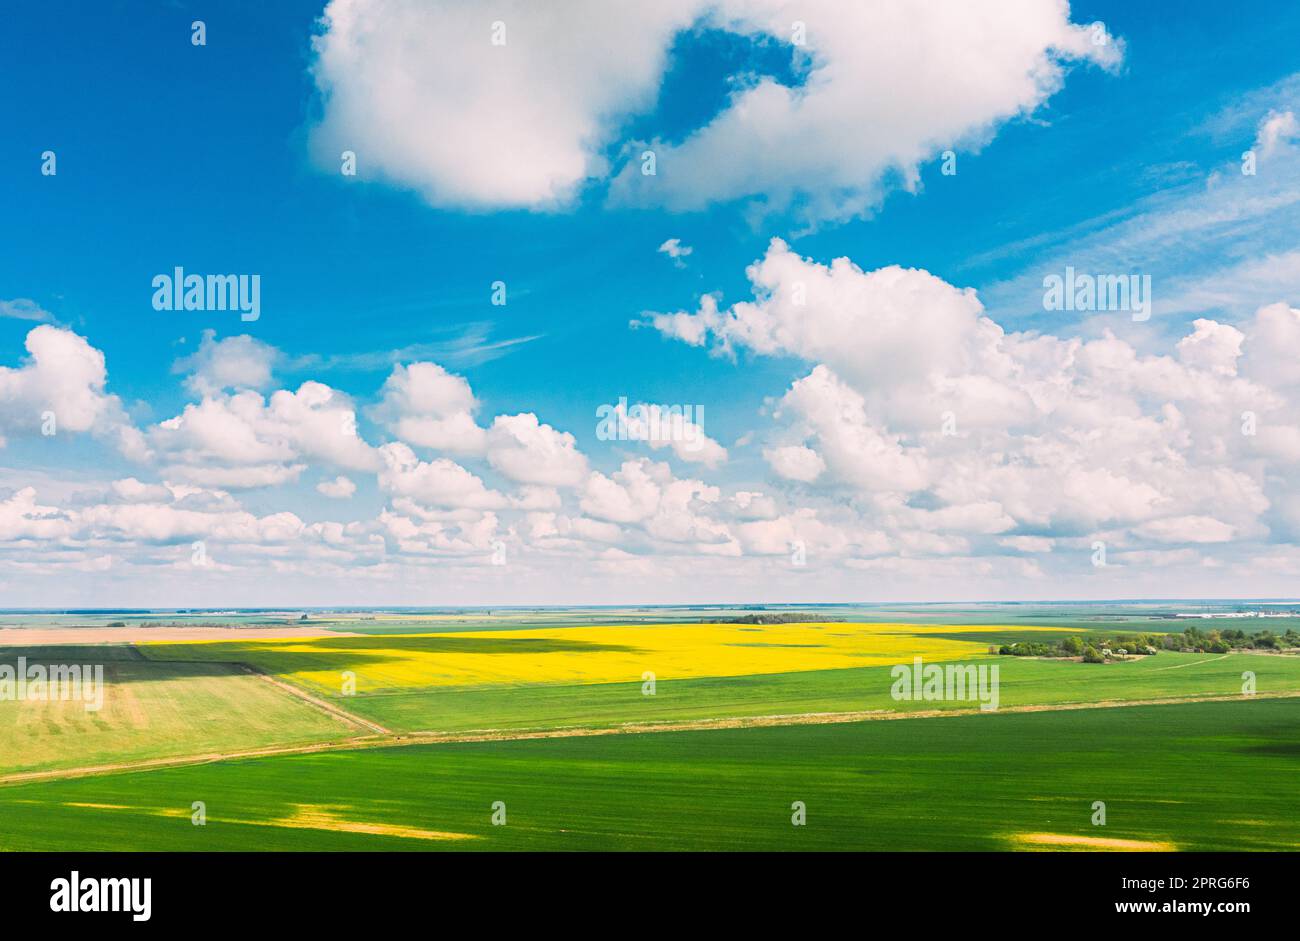 Aerial View Of Agricultural Landscape With Flowering Blooming Rapeseed, Oilseed And Green Young Wheat Field In Spring Season. Blossom Of Canola Yellow Flowers. Beautiful Rural Landscape. Stock Photo